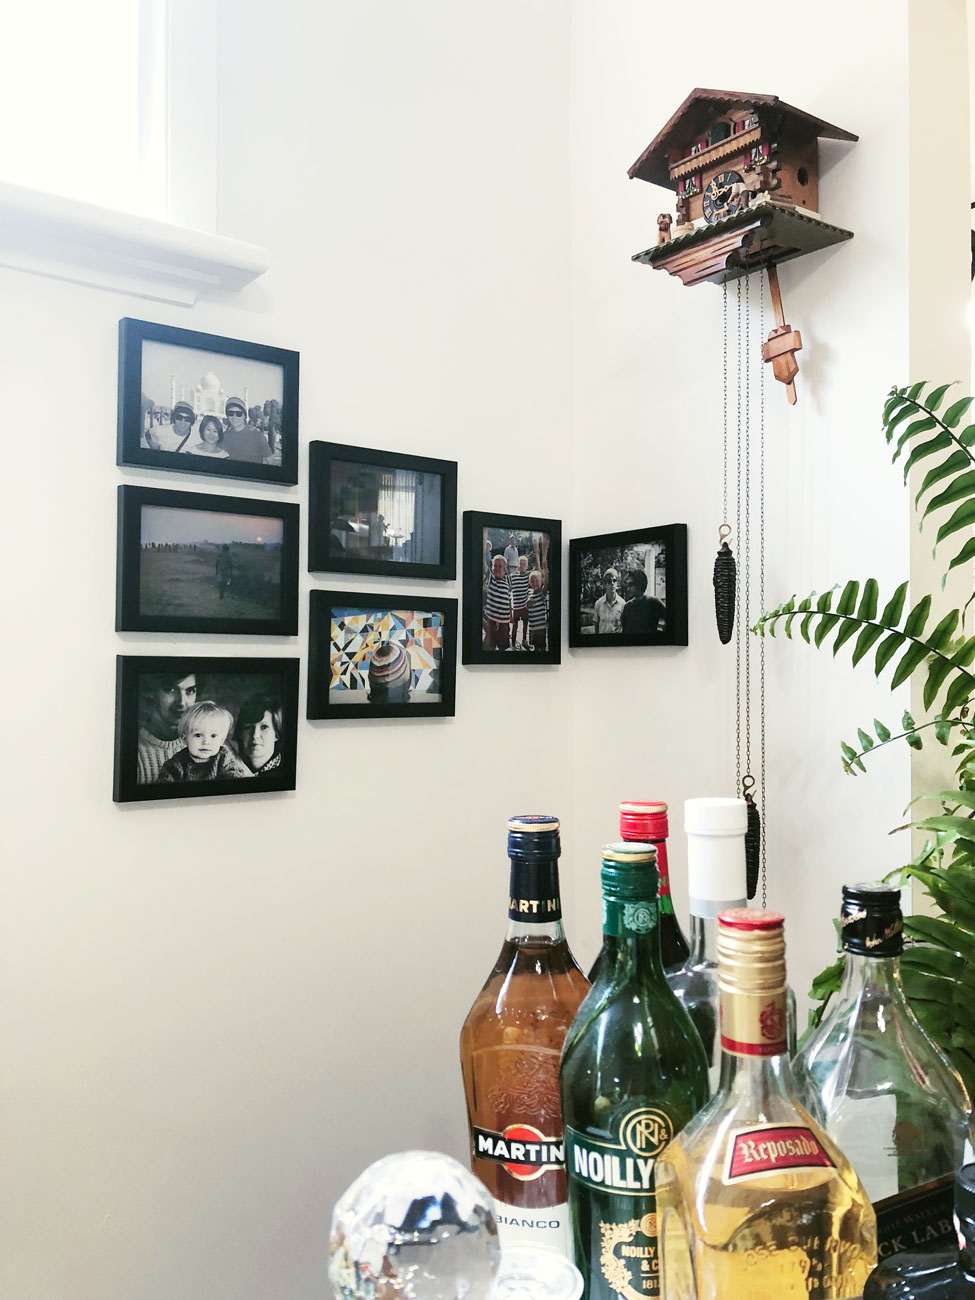 5 ideas for hanging art gallery-style in your own home